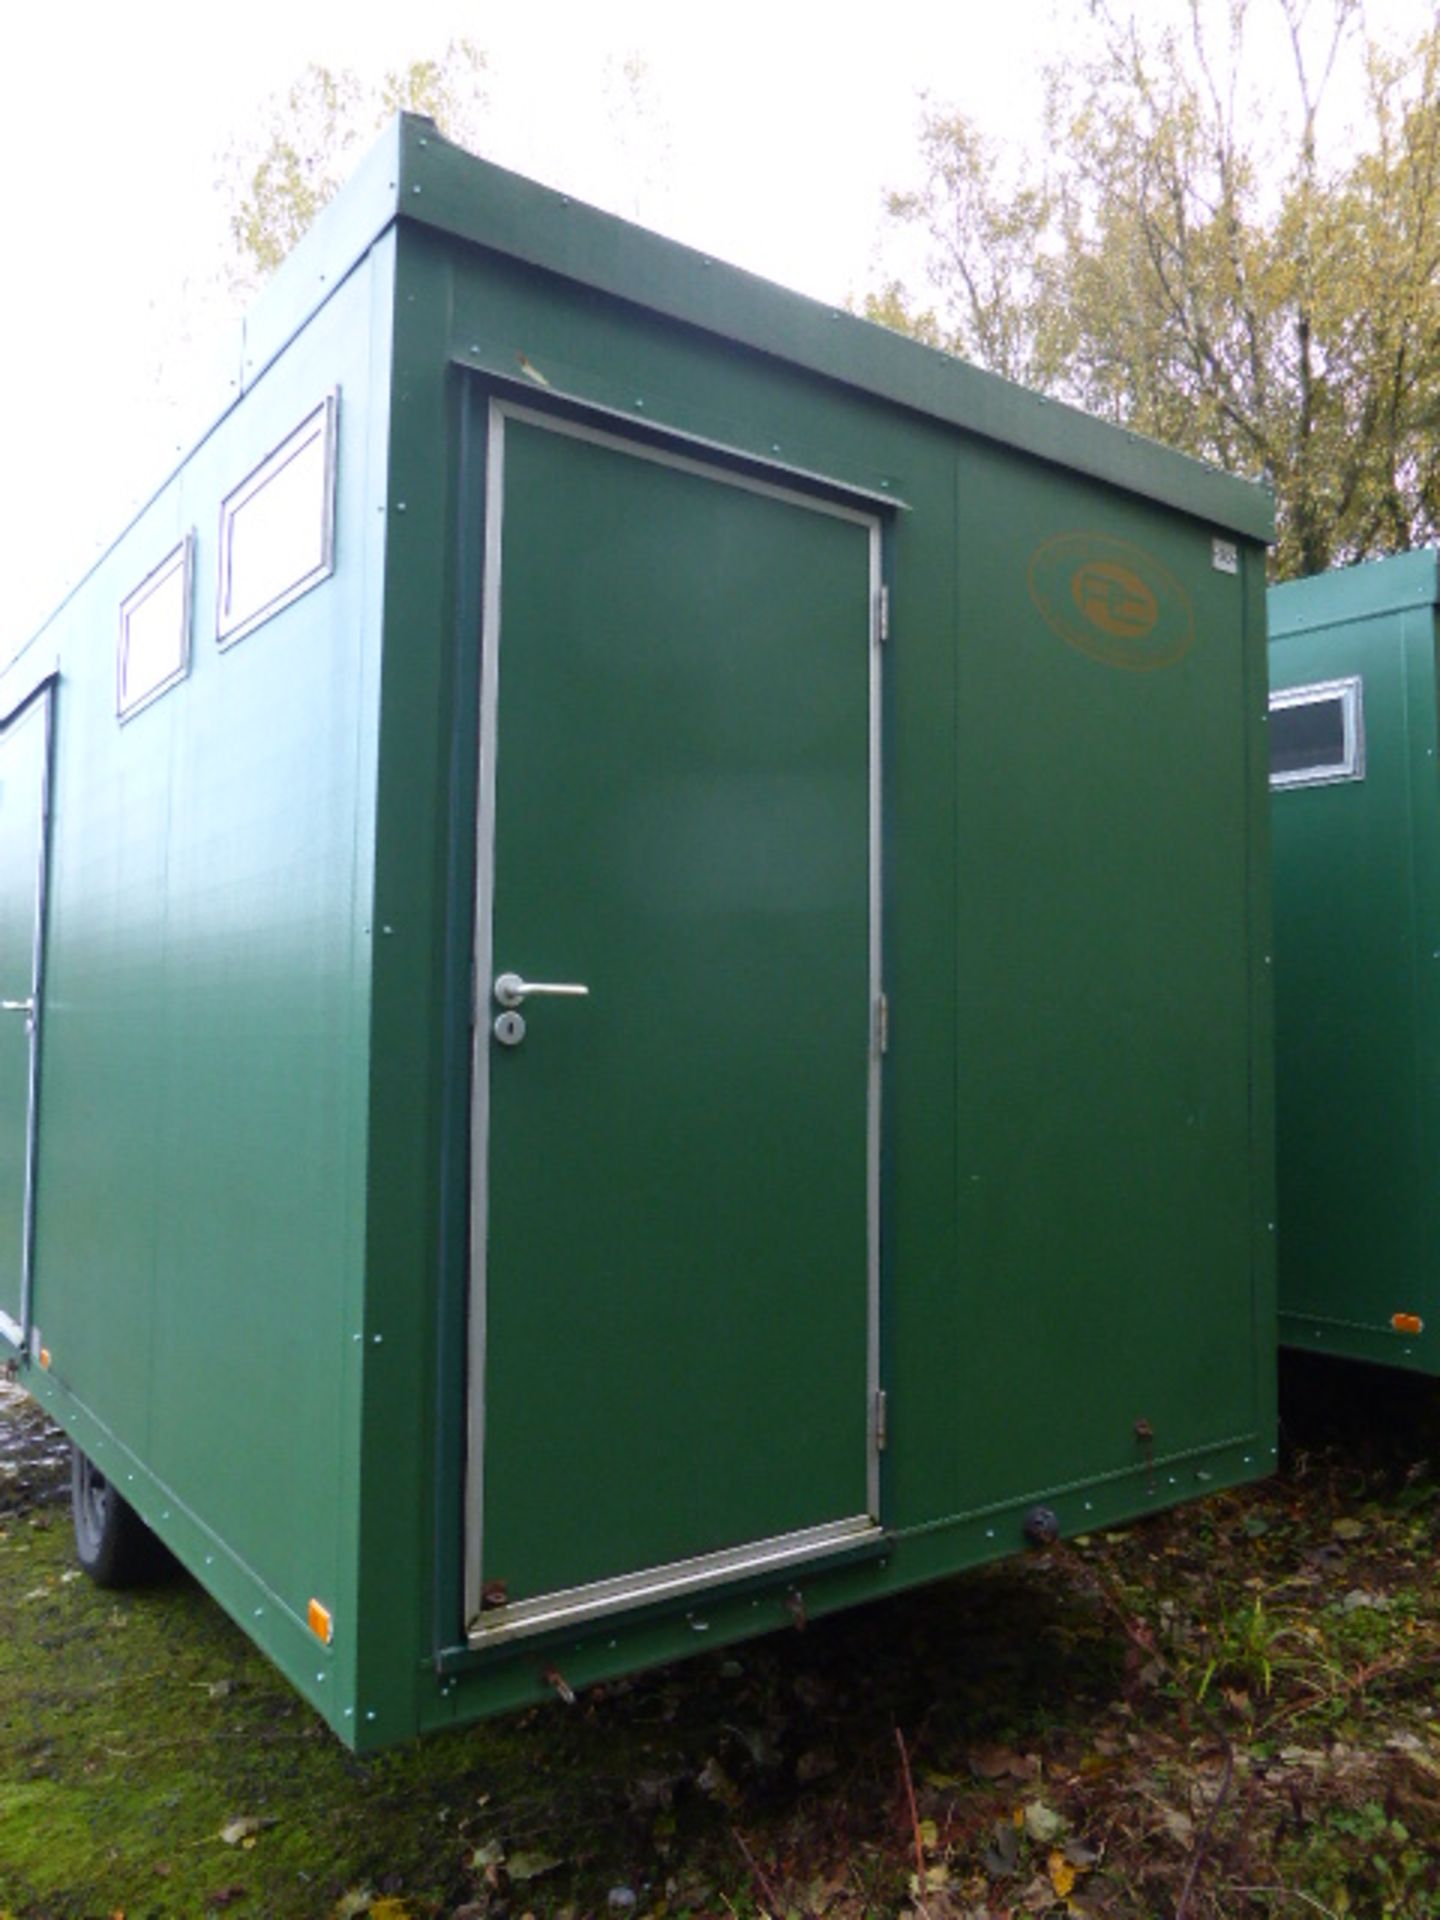 Springfield standard single axle toilet trailer 3 + 1 + urinal toilet trailer with mains connection - Image 6 of 20